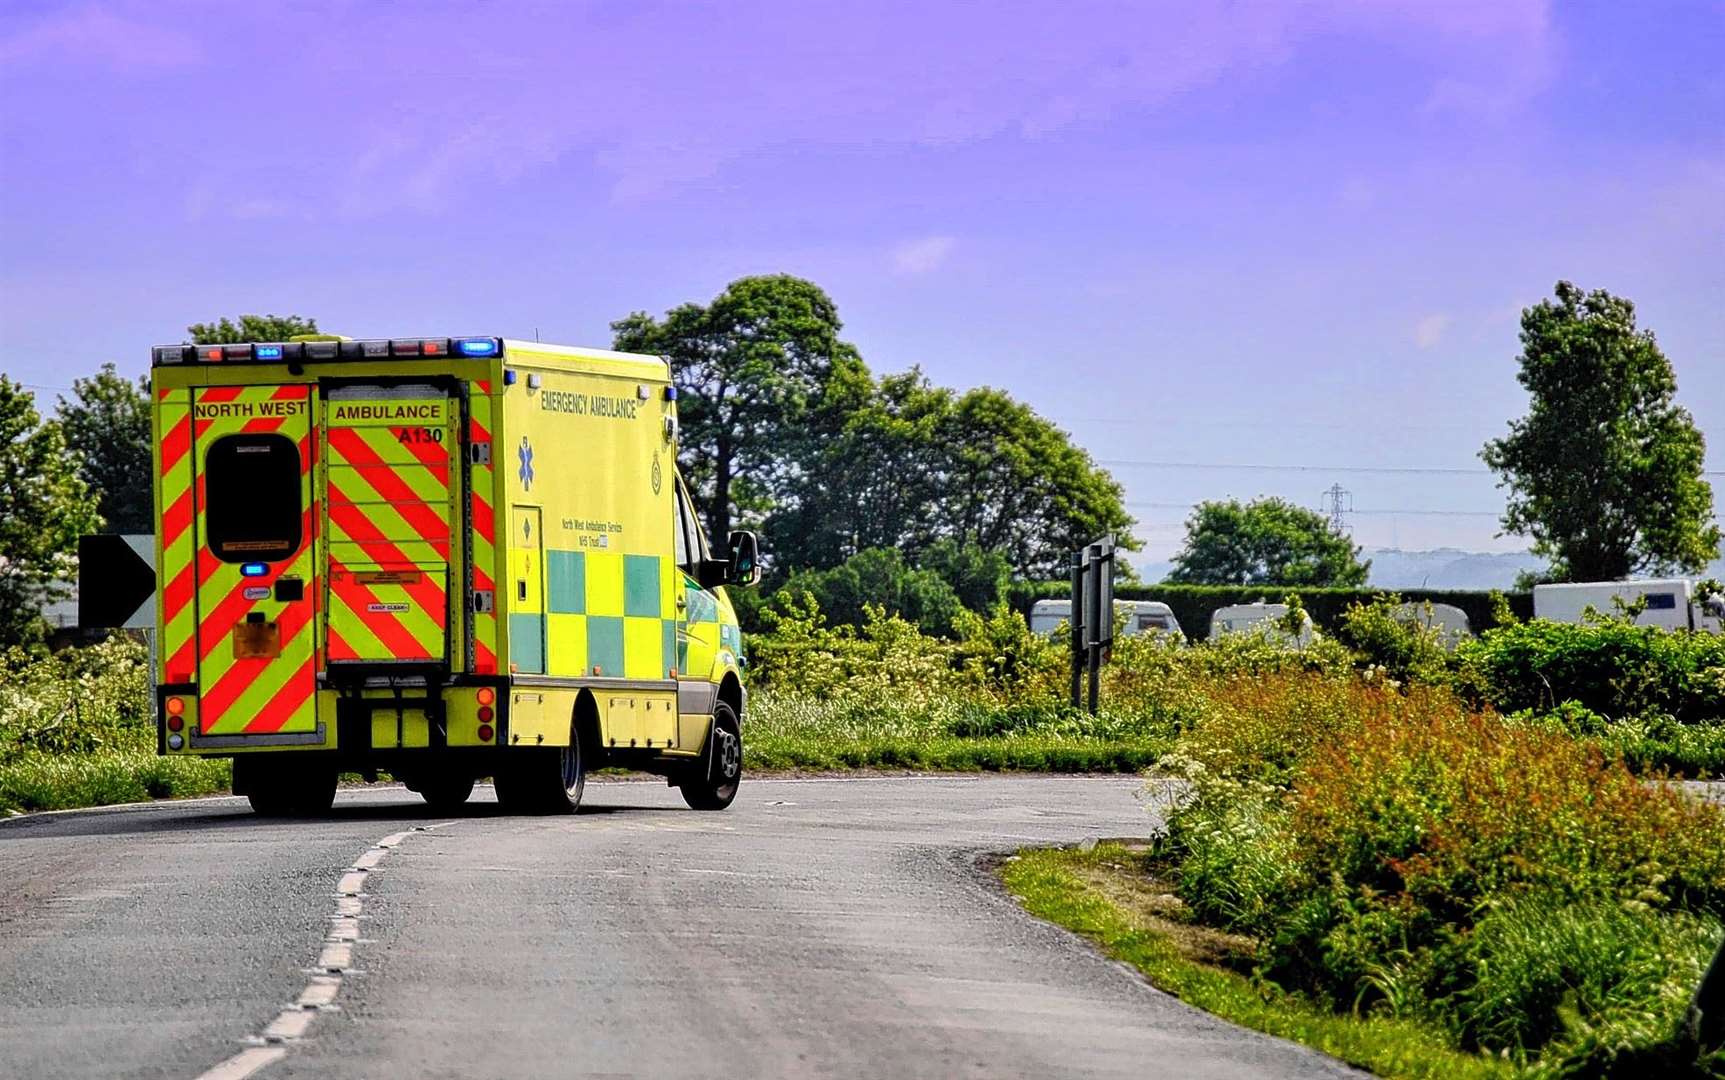 More than 200 assaults were committed against north region Scottish Ambulance Service staff at work over the past six years